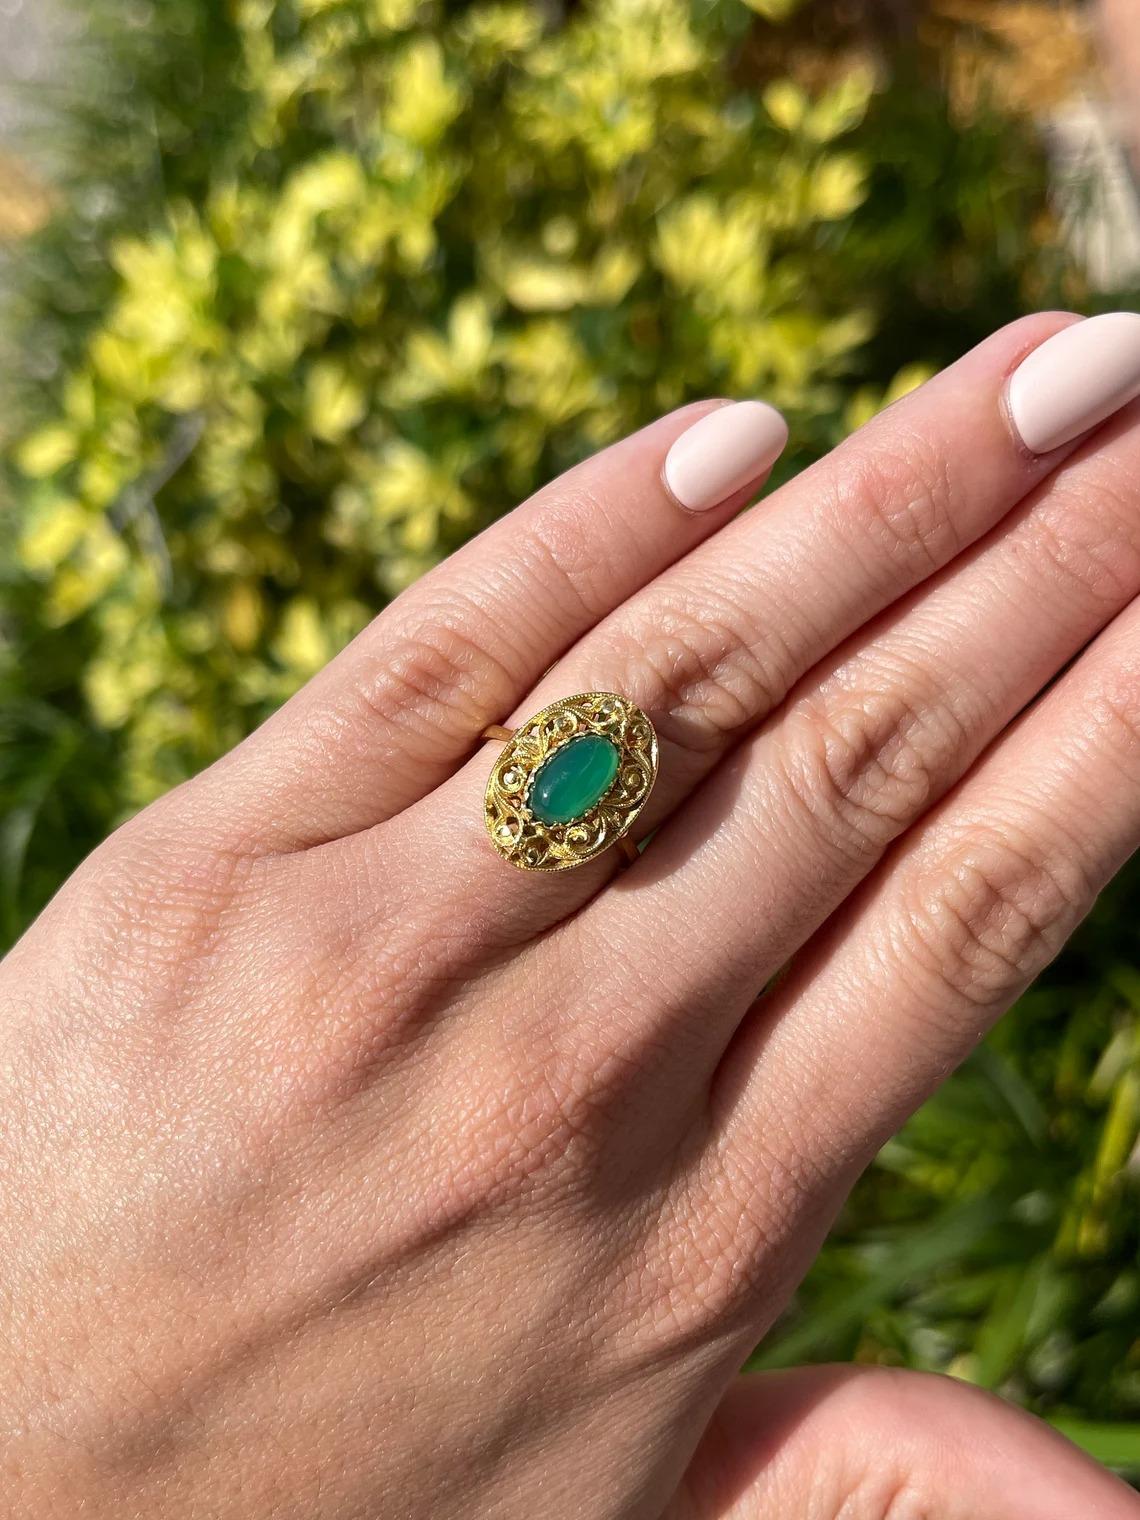 Handmade 2.03cts 18K Natural Green Cabochon Elongated Oval Floral Antique Ring For Sale 2